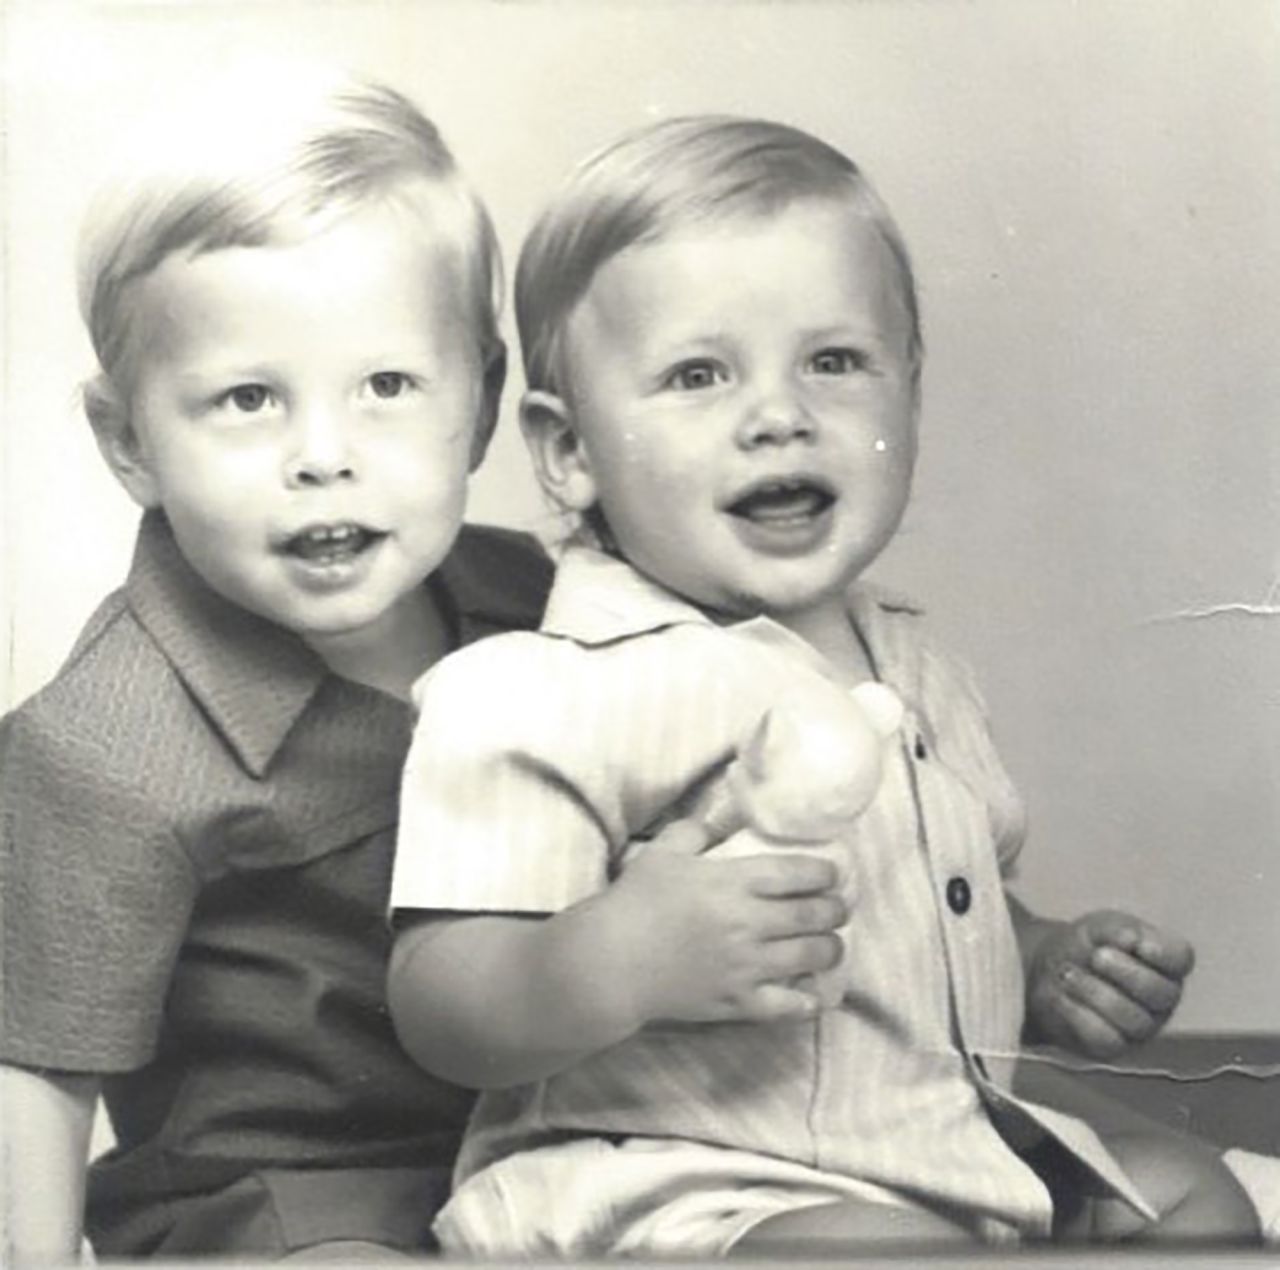 Musk, left, is seen with his brother, Kimbal, in this childhood photo <a href="https://www.instagram.com/p/Byxl2pIJrkL/?hl=en" target="_blank" target="_blank">posted by their mother, Maye</a>. Elon Musk was born June 28, 1971, in Pretoria, South Africa. His mother is a model and nutritionist. His father, Errol, is an engineer.